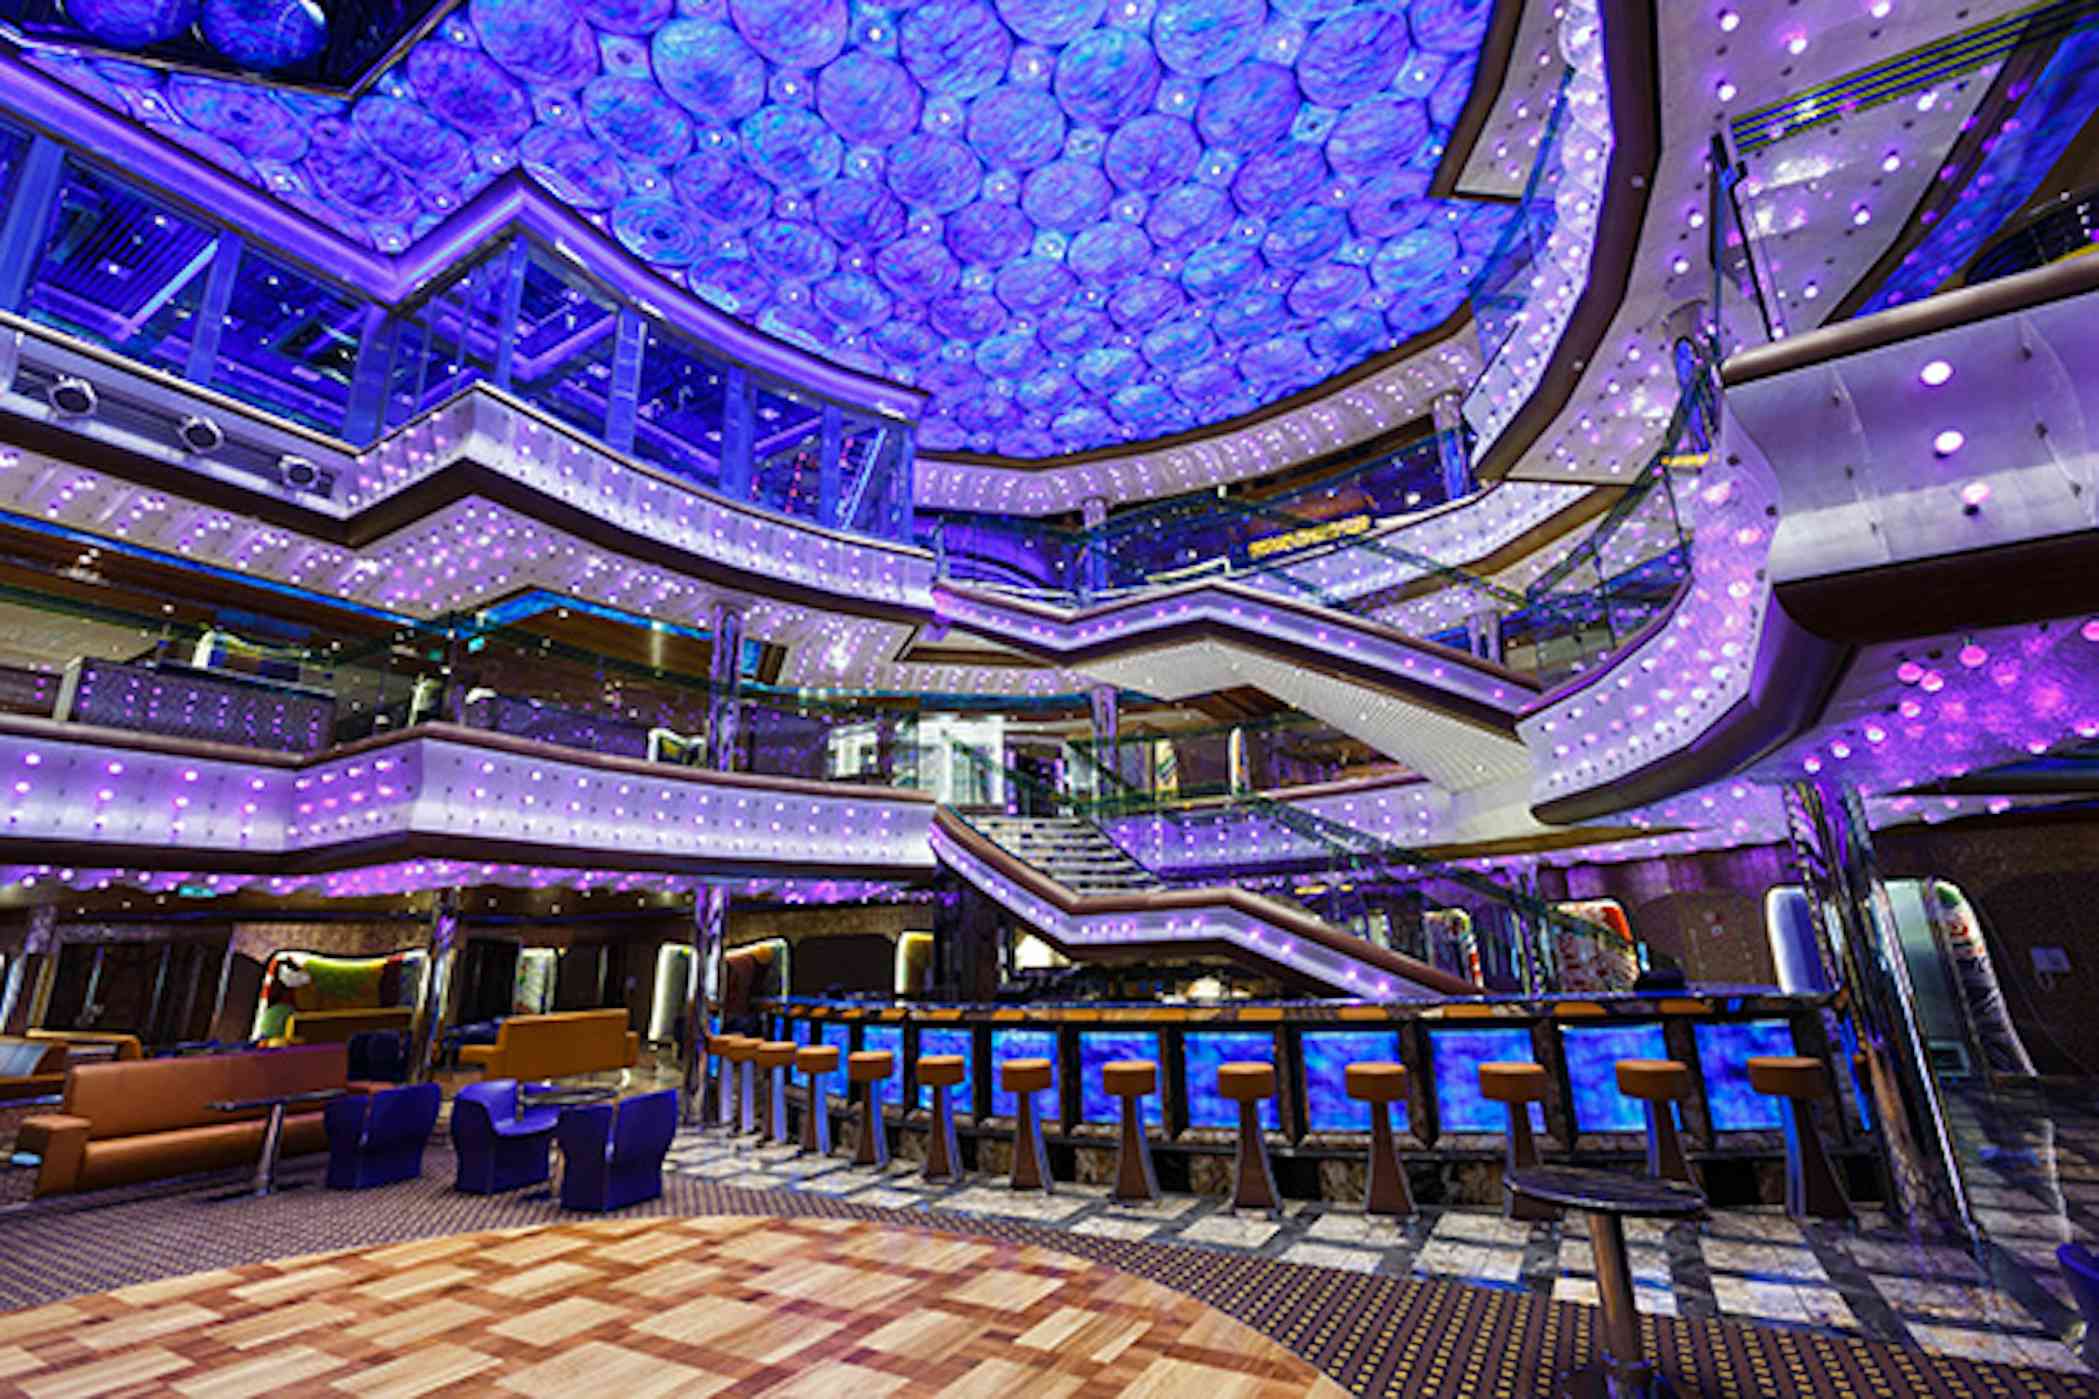 6 Ships With Over-the-Top Cruise Ship Decor